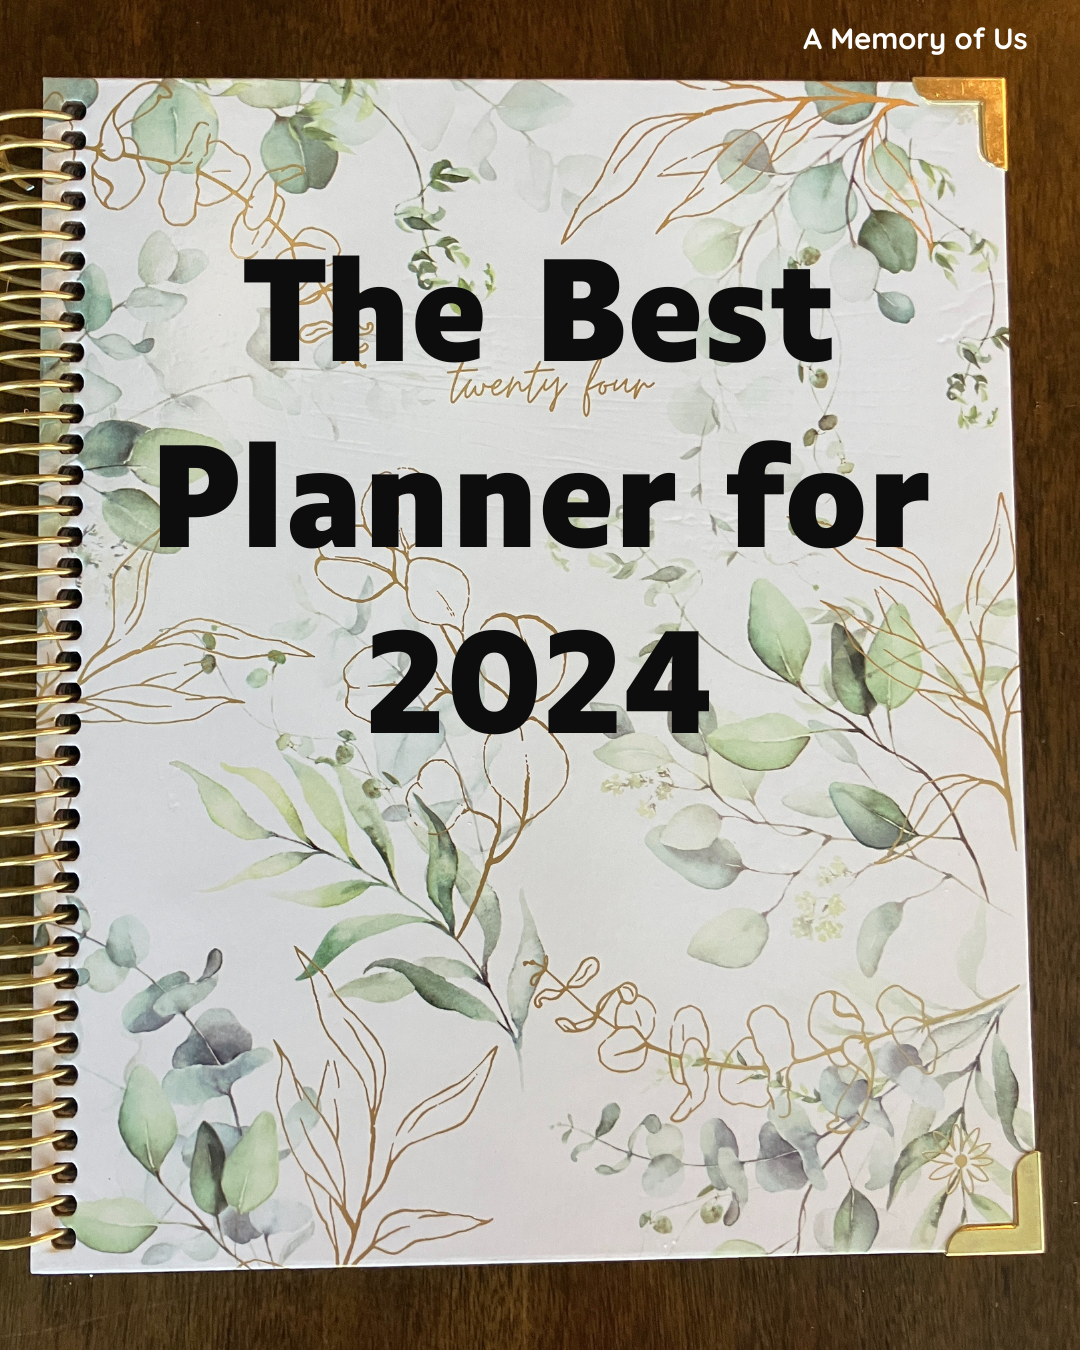 What is the best planner for 2024 | Best Planners 2024 | Vision Planner Review | Bloom Vision Planners | What Makes a Good Planner | Organization Tools | Organization Goal for Next Year